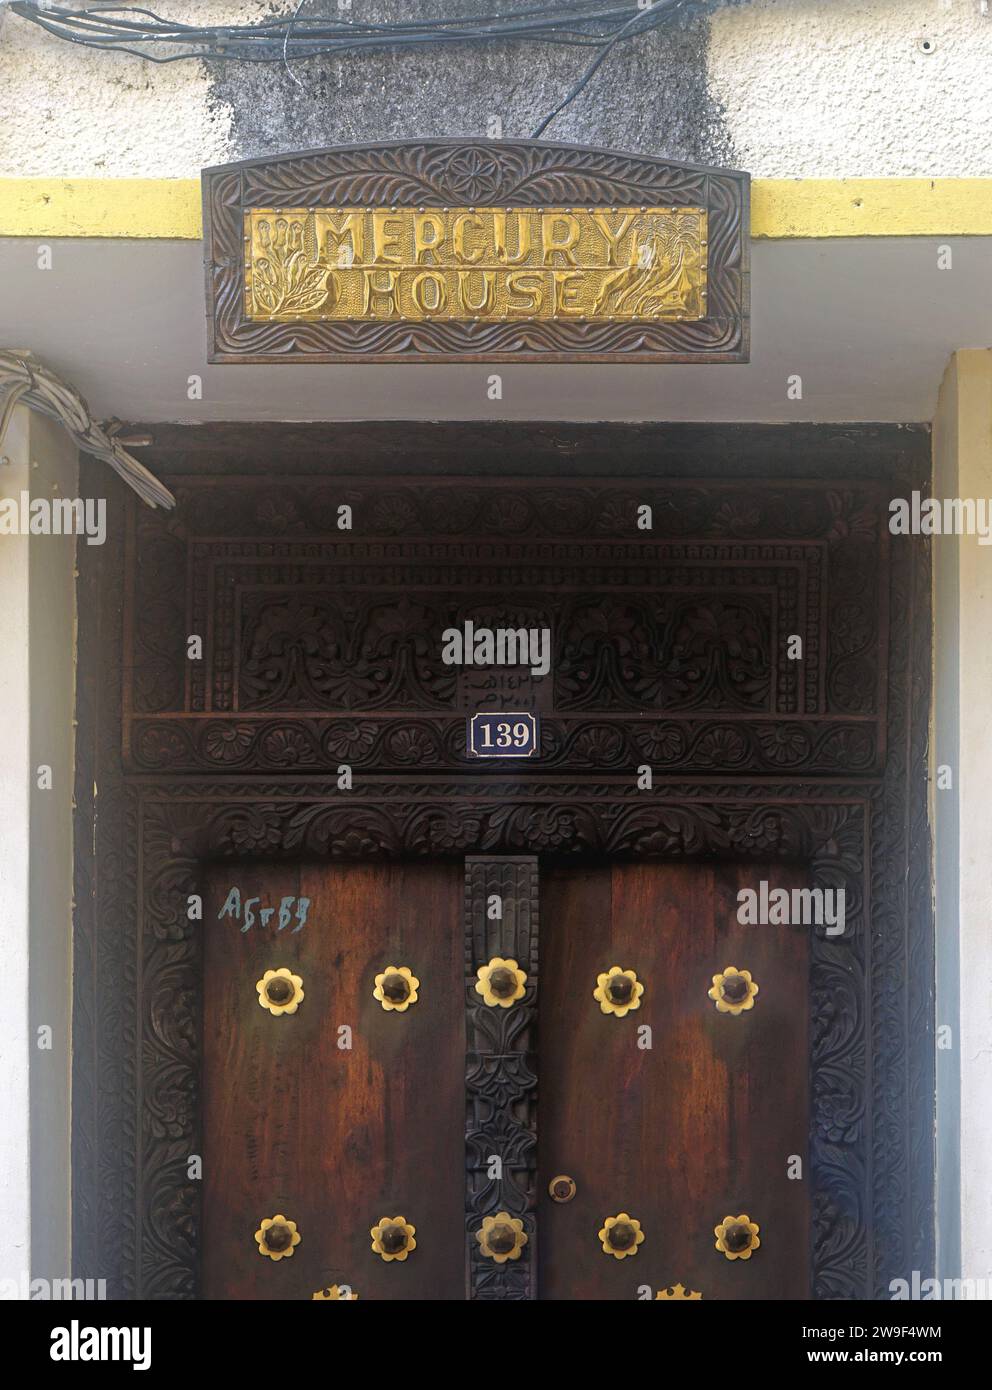 Zanzibar, Tanzania - July 18, 2017: Freddie Mercury famous Queen vocalist house and museum in Stone Town. Stock Photo